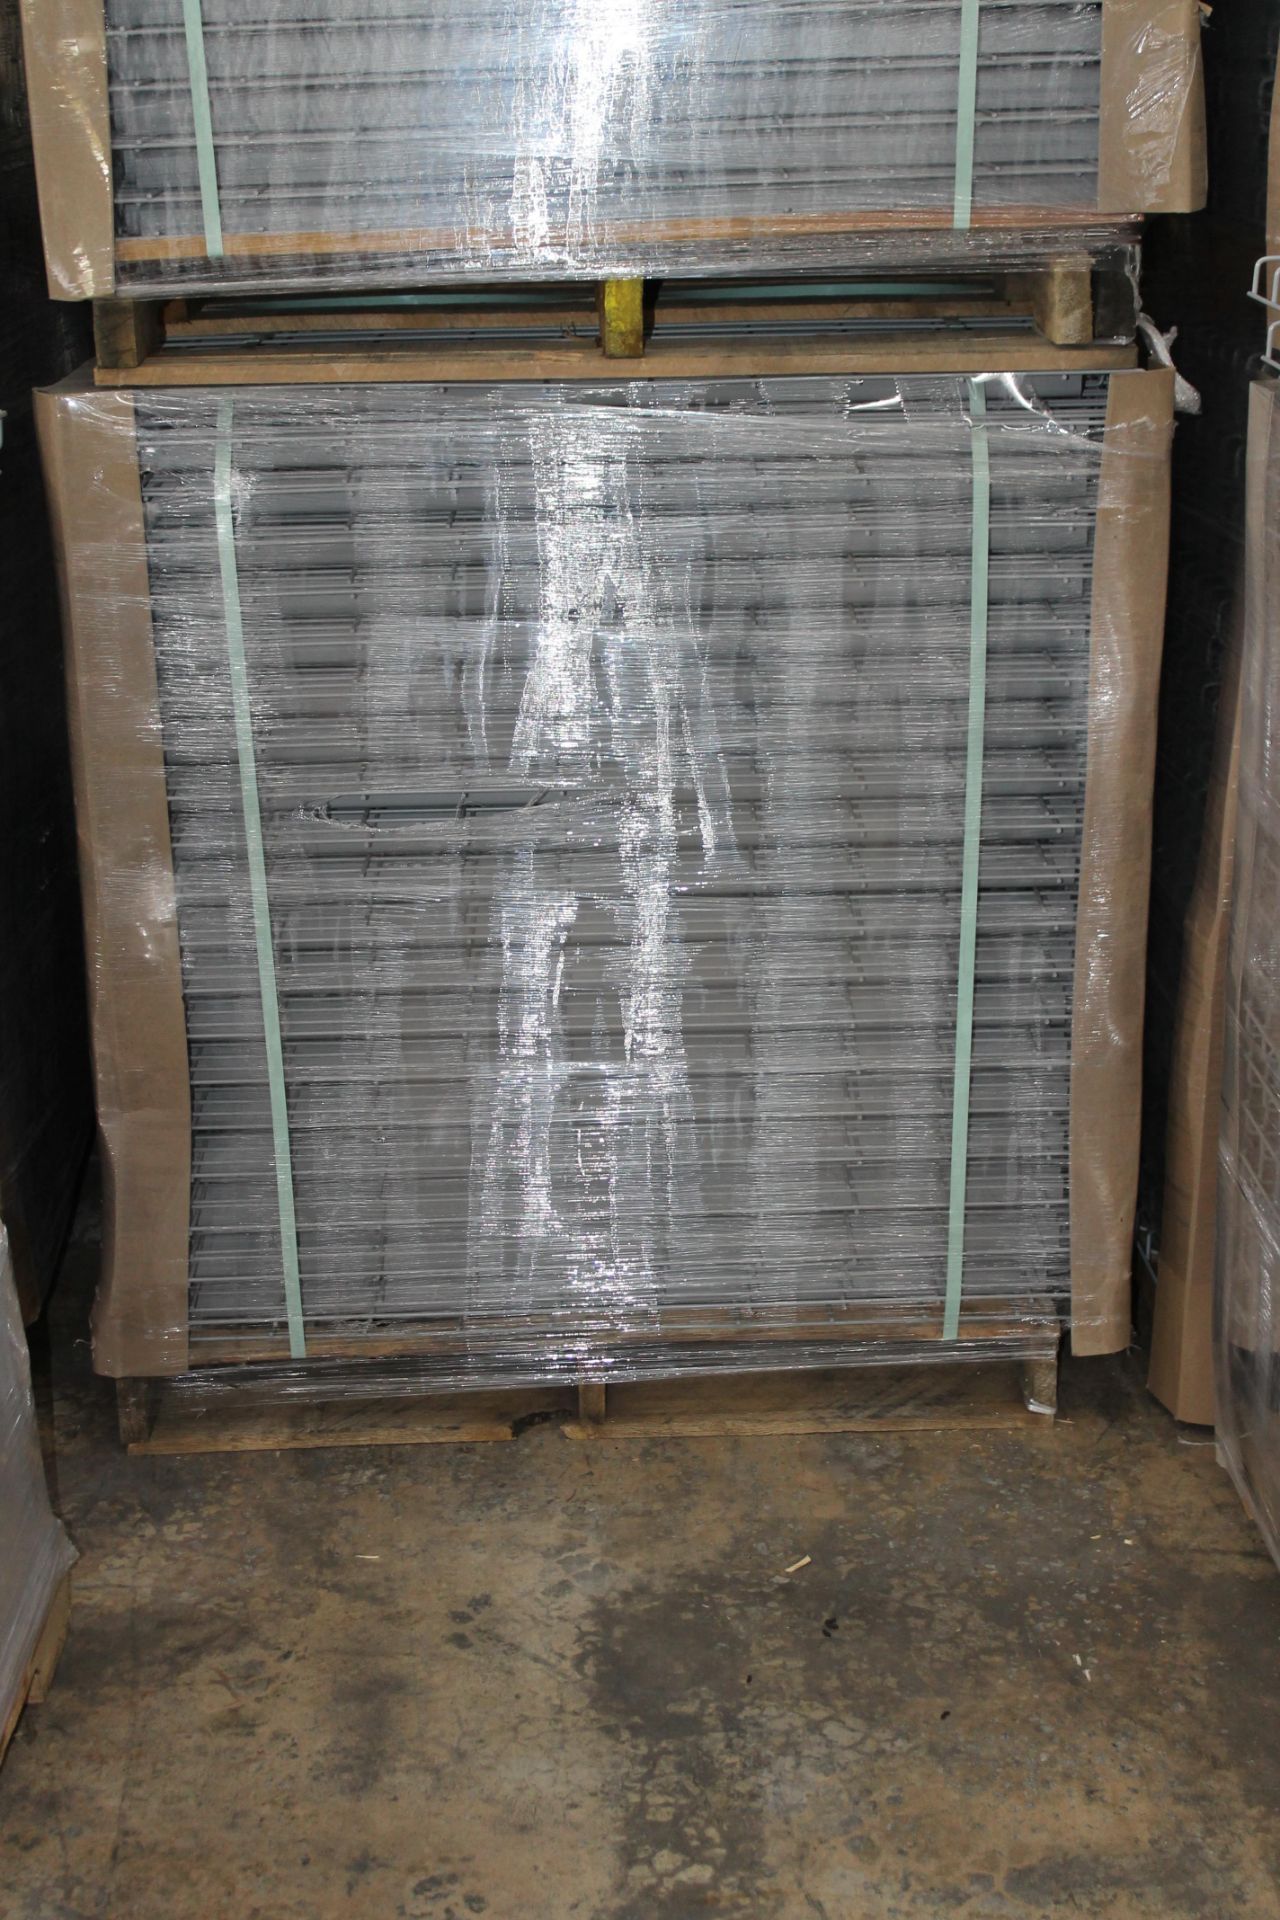 (80X) NEW STANDARD 48" X 46" WIREDECK - 2500 LBS CAPACITY - Image 2 of 2